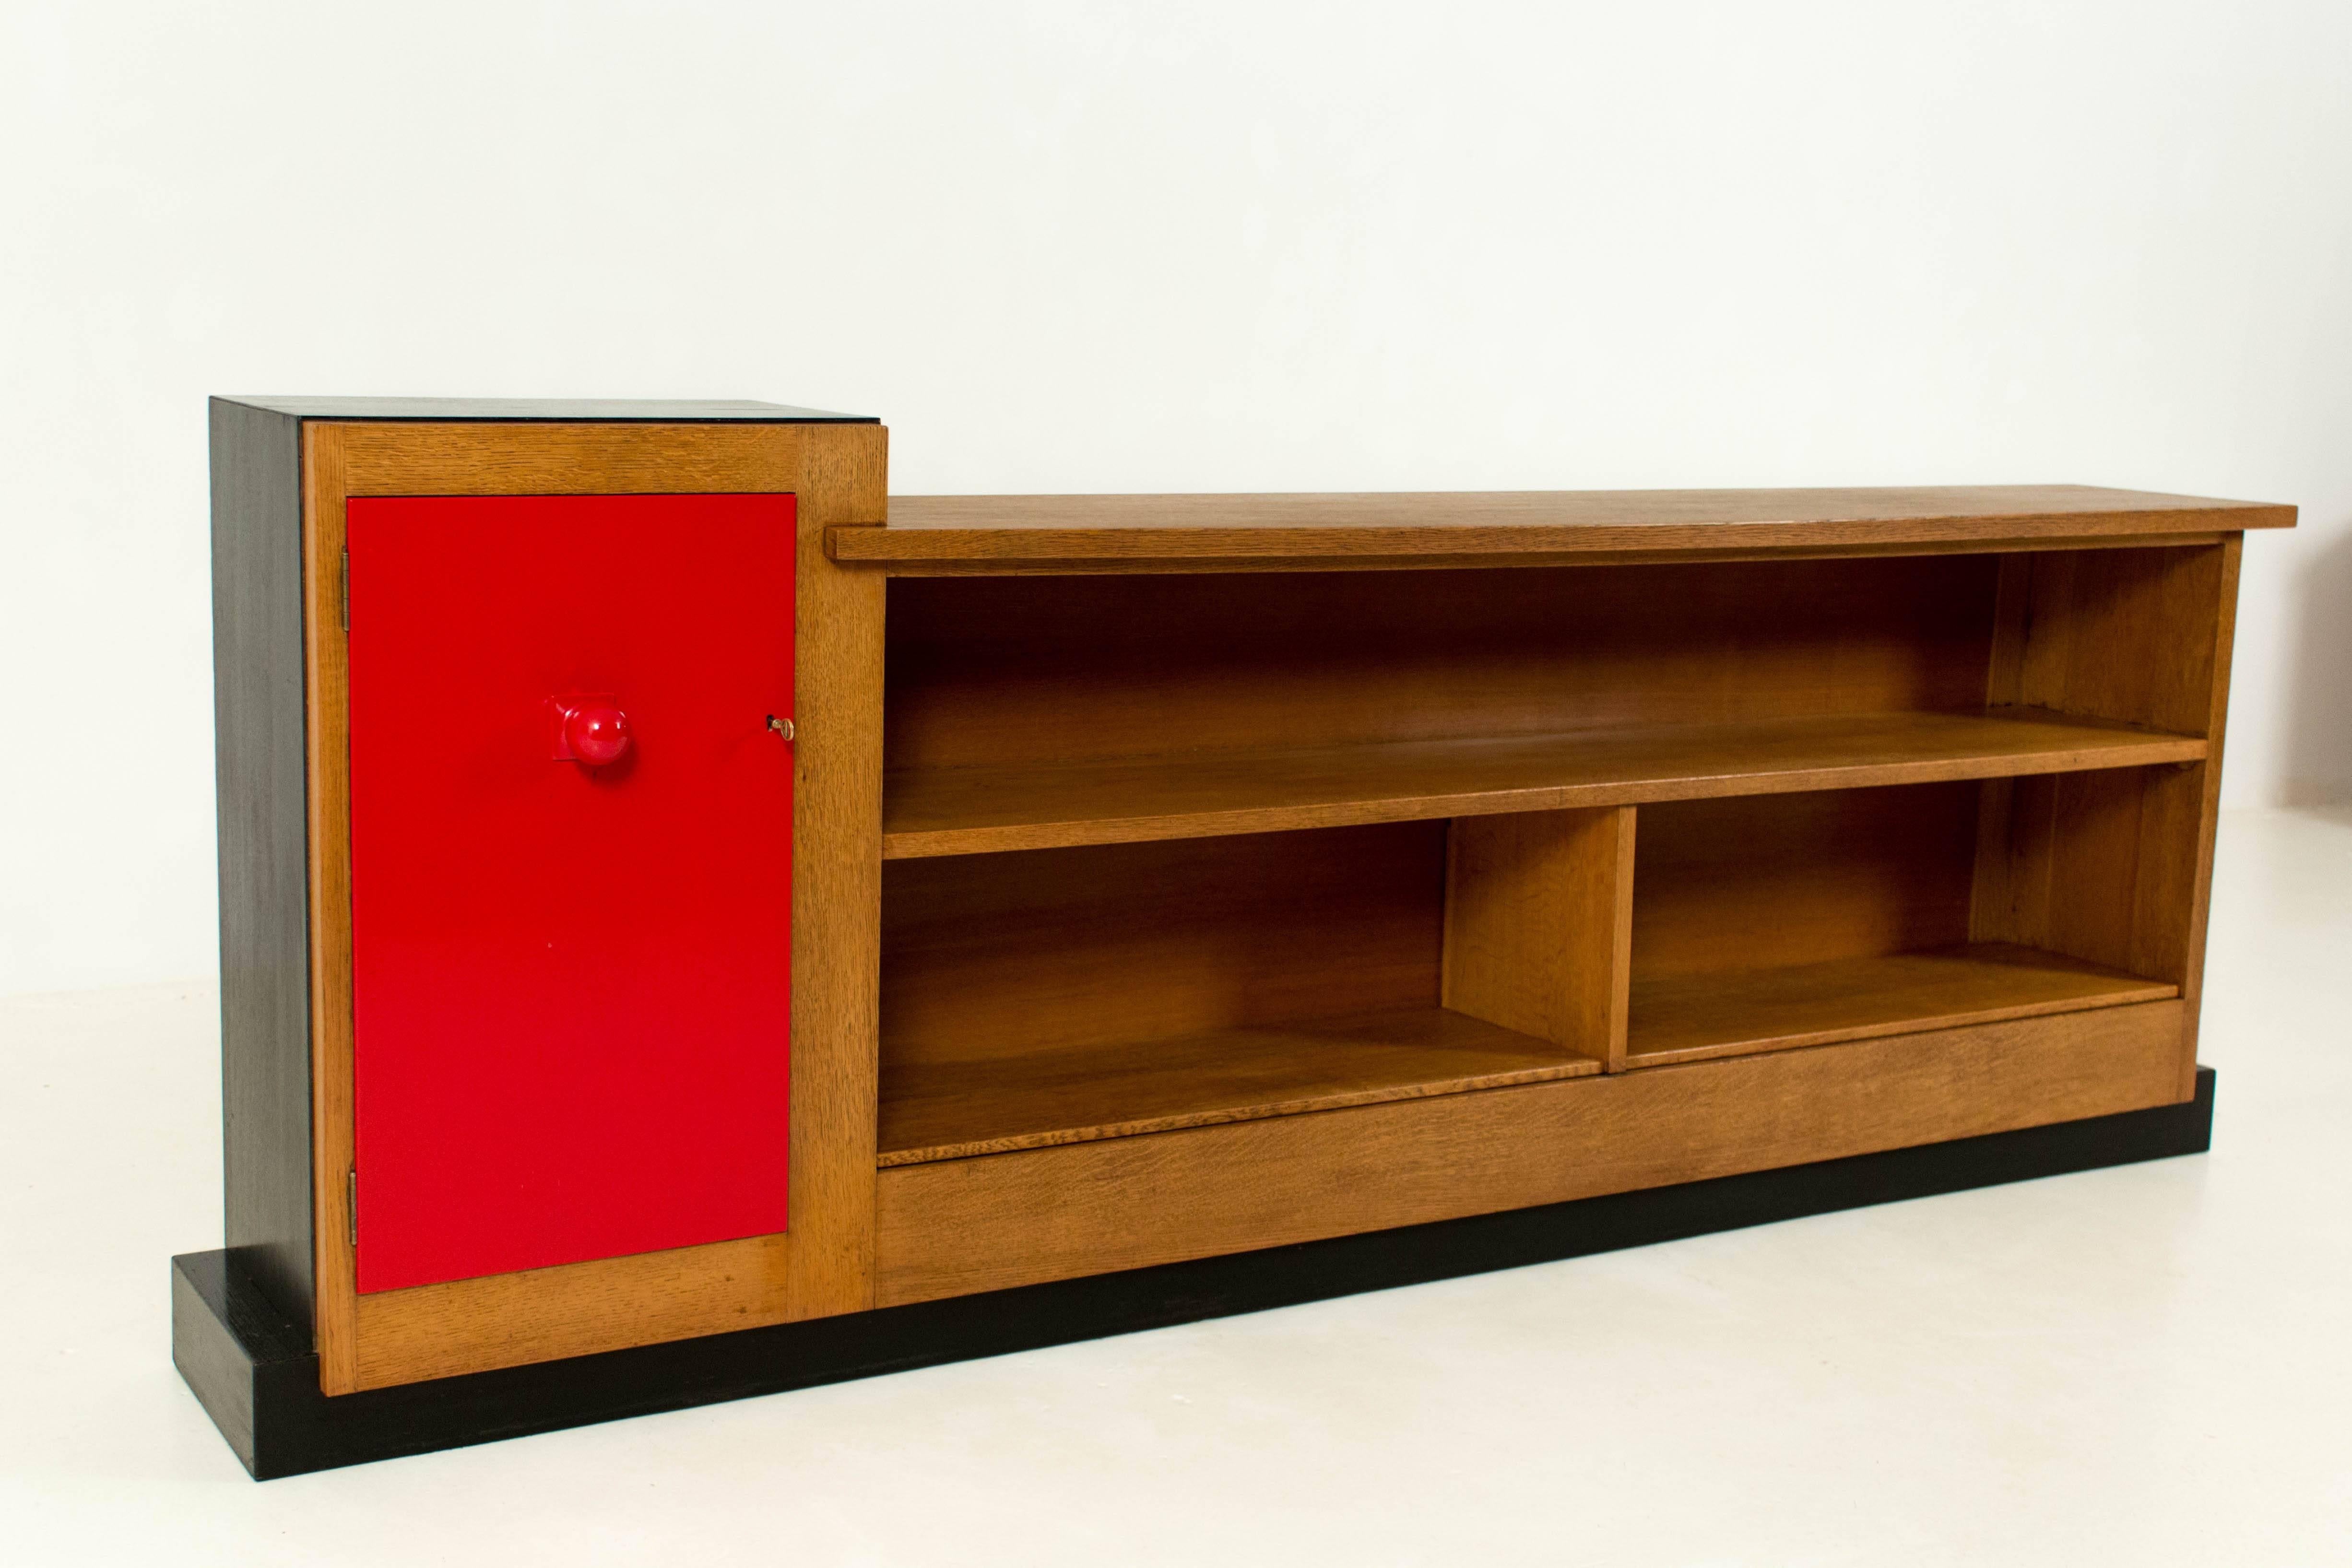 Dutch Important and Rare Art Deco Haagse School Sideboard by Henk Wouda for Pander